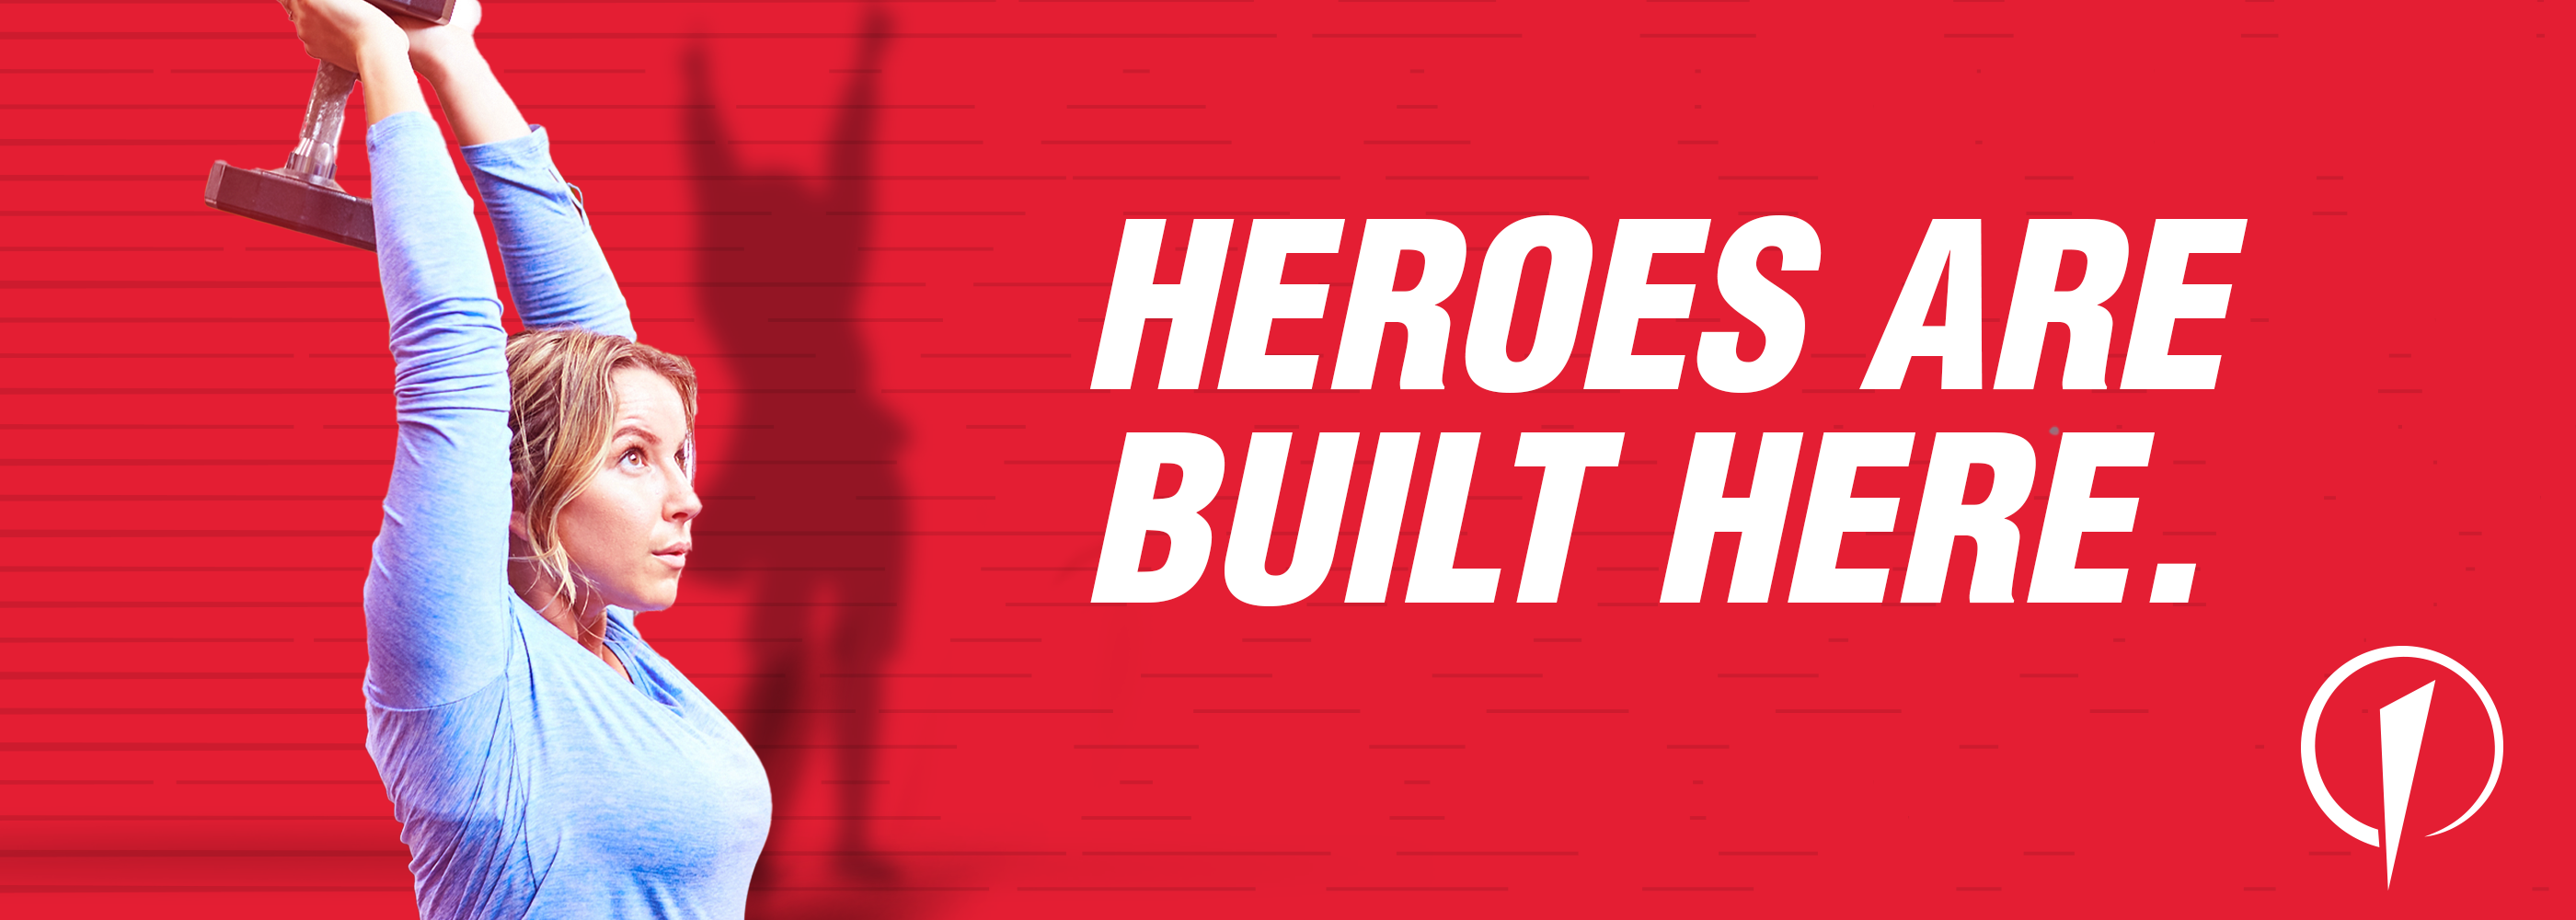 "Heroes are built here" — motto and driving principle at The Edge Fitness Clubs